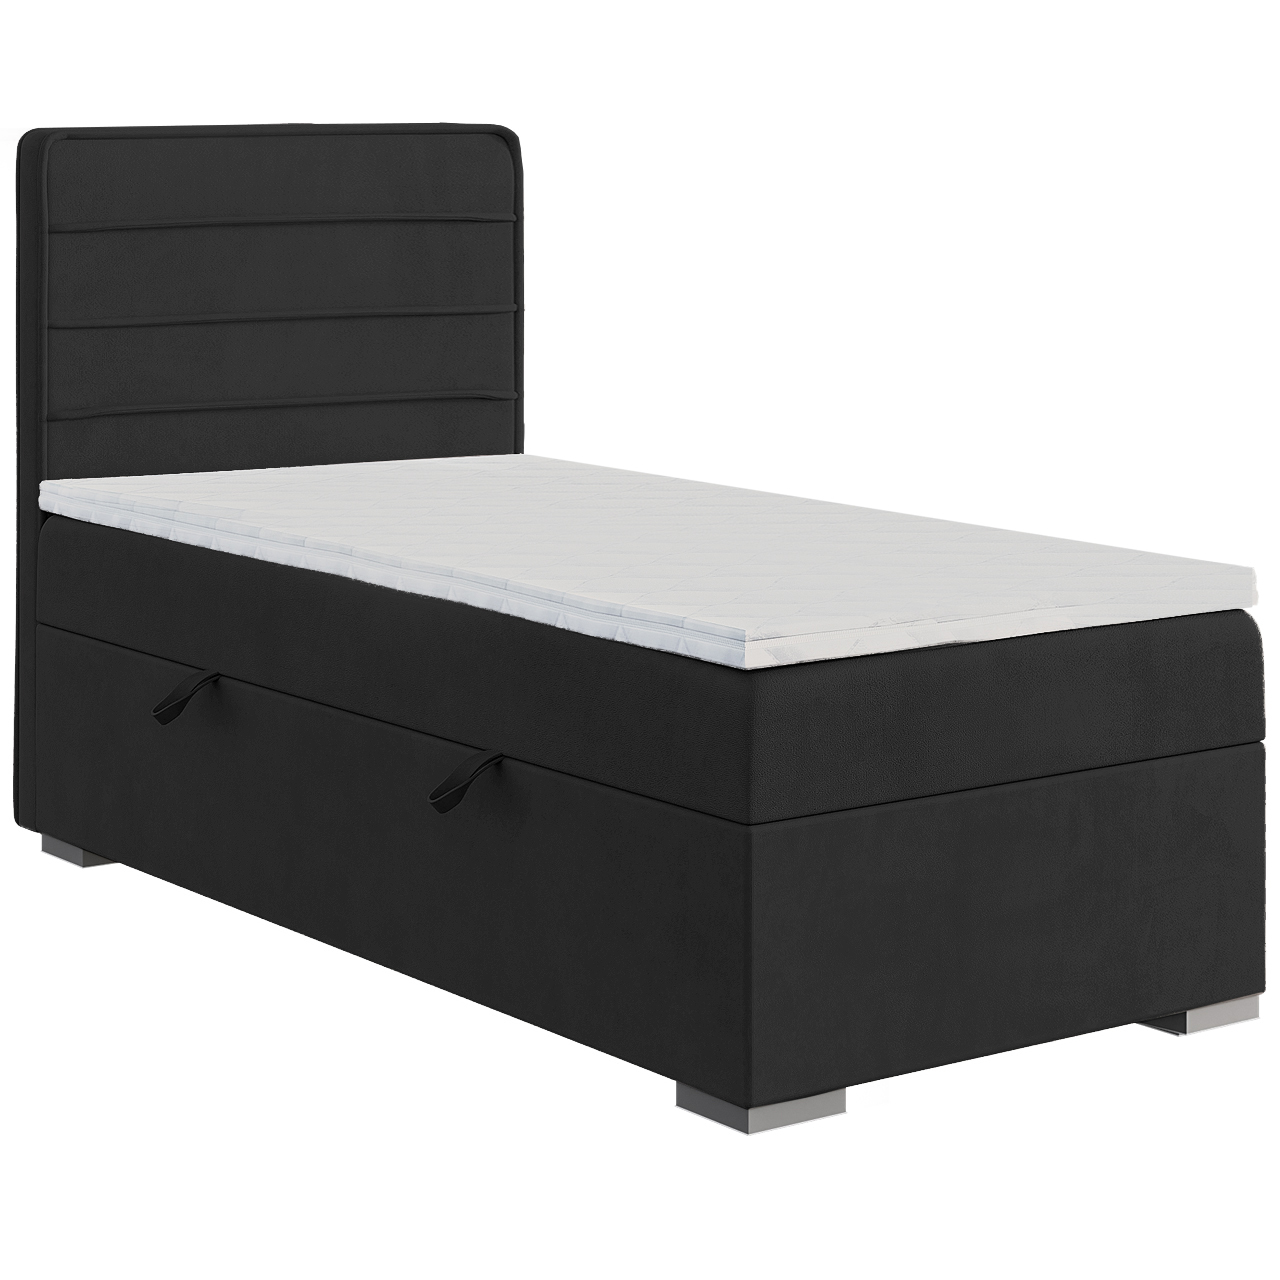 Upholstered bed BEROTTI 90x200 right riviera 100